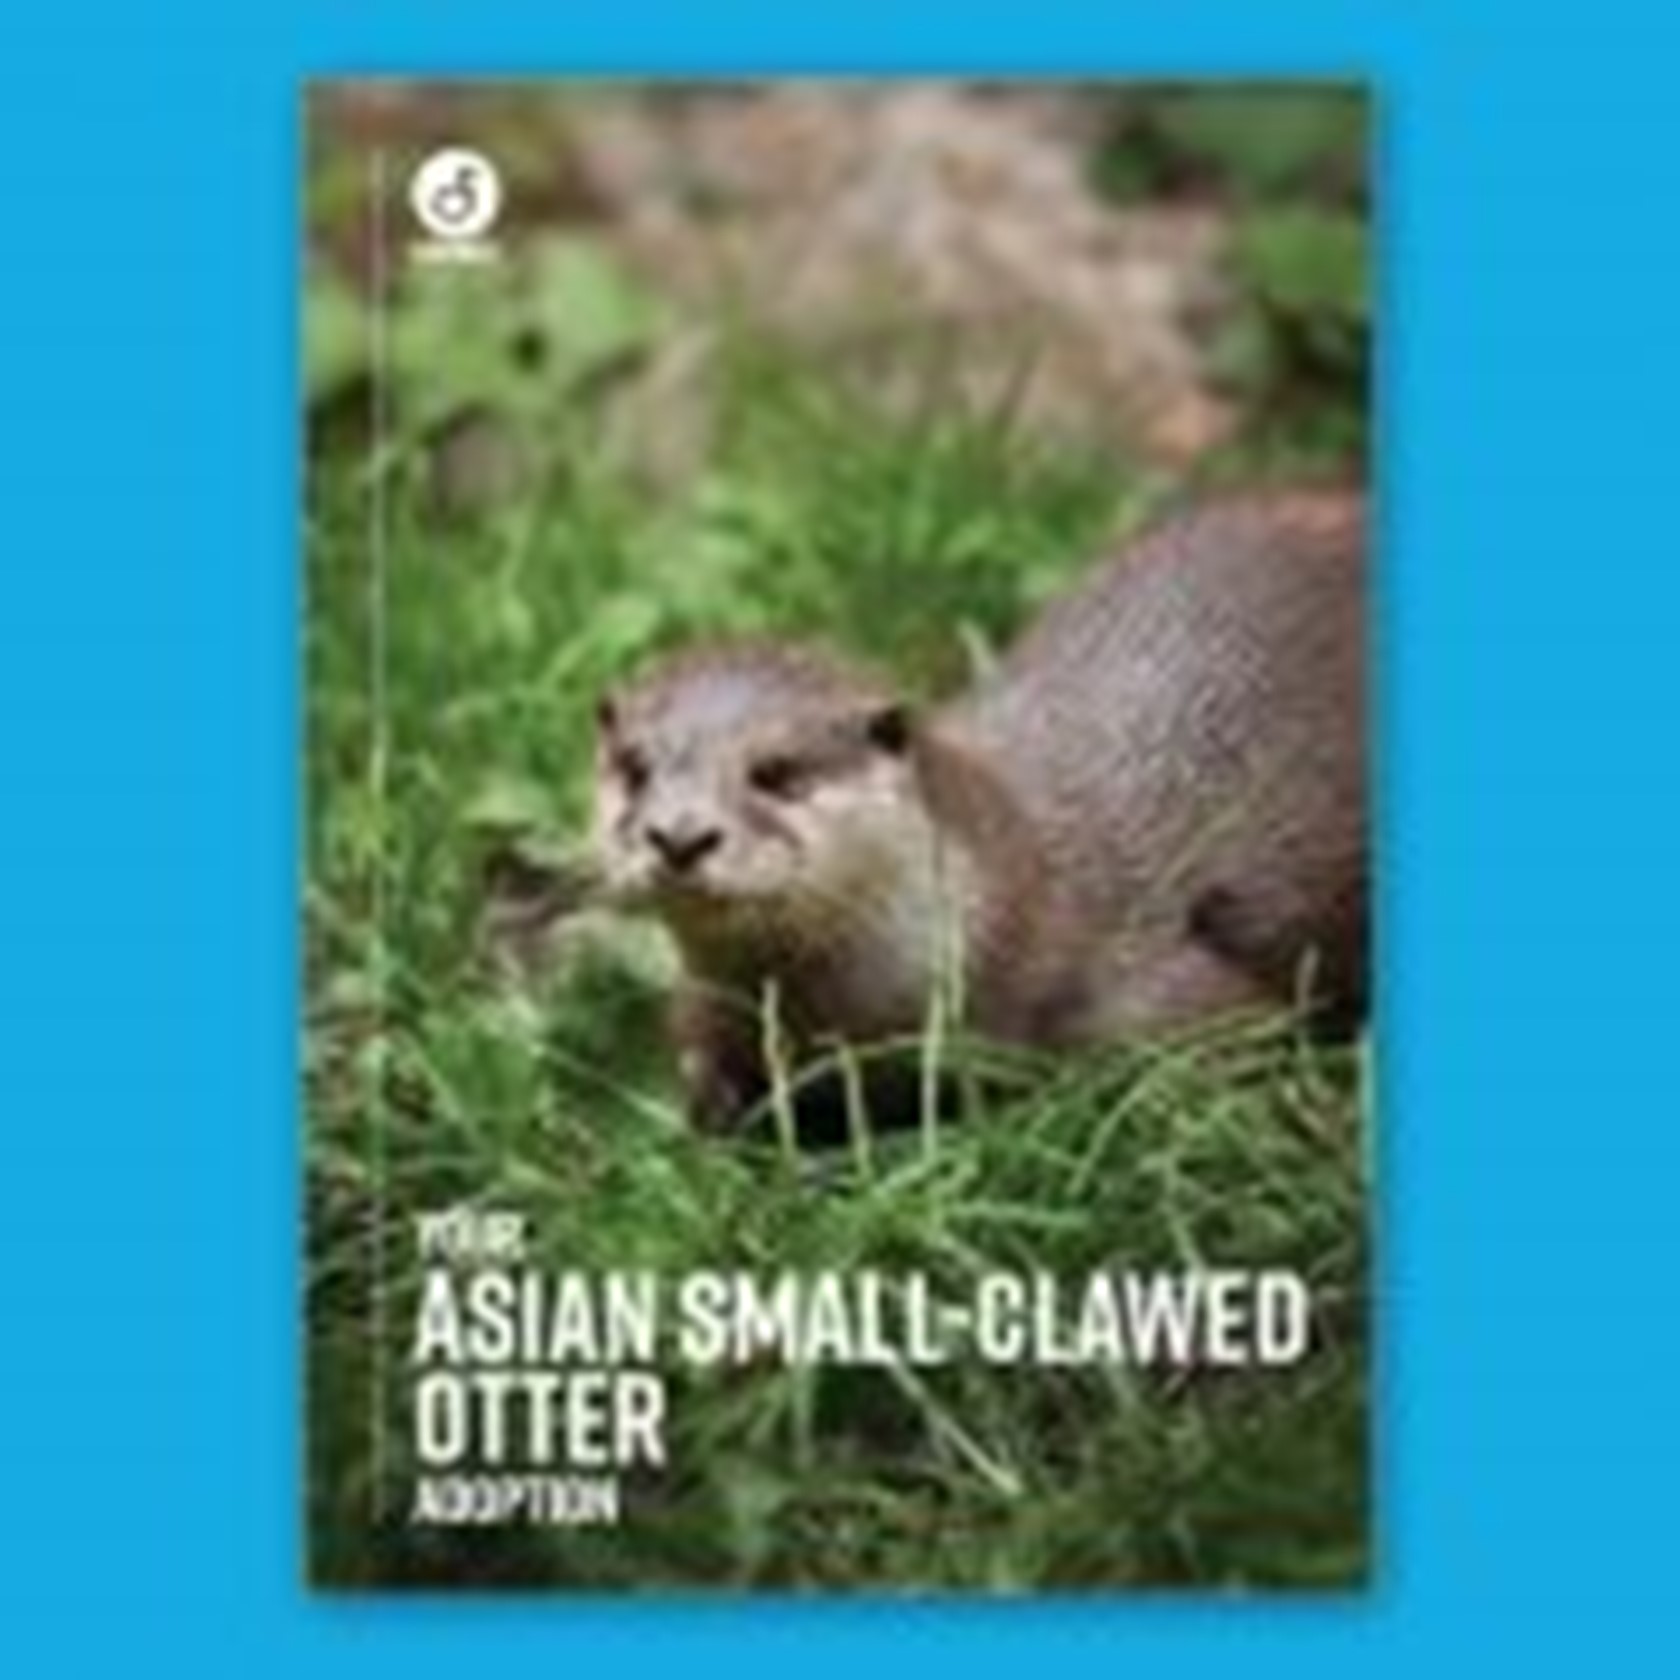 Digital Adoption - Asian small-clawed otters